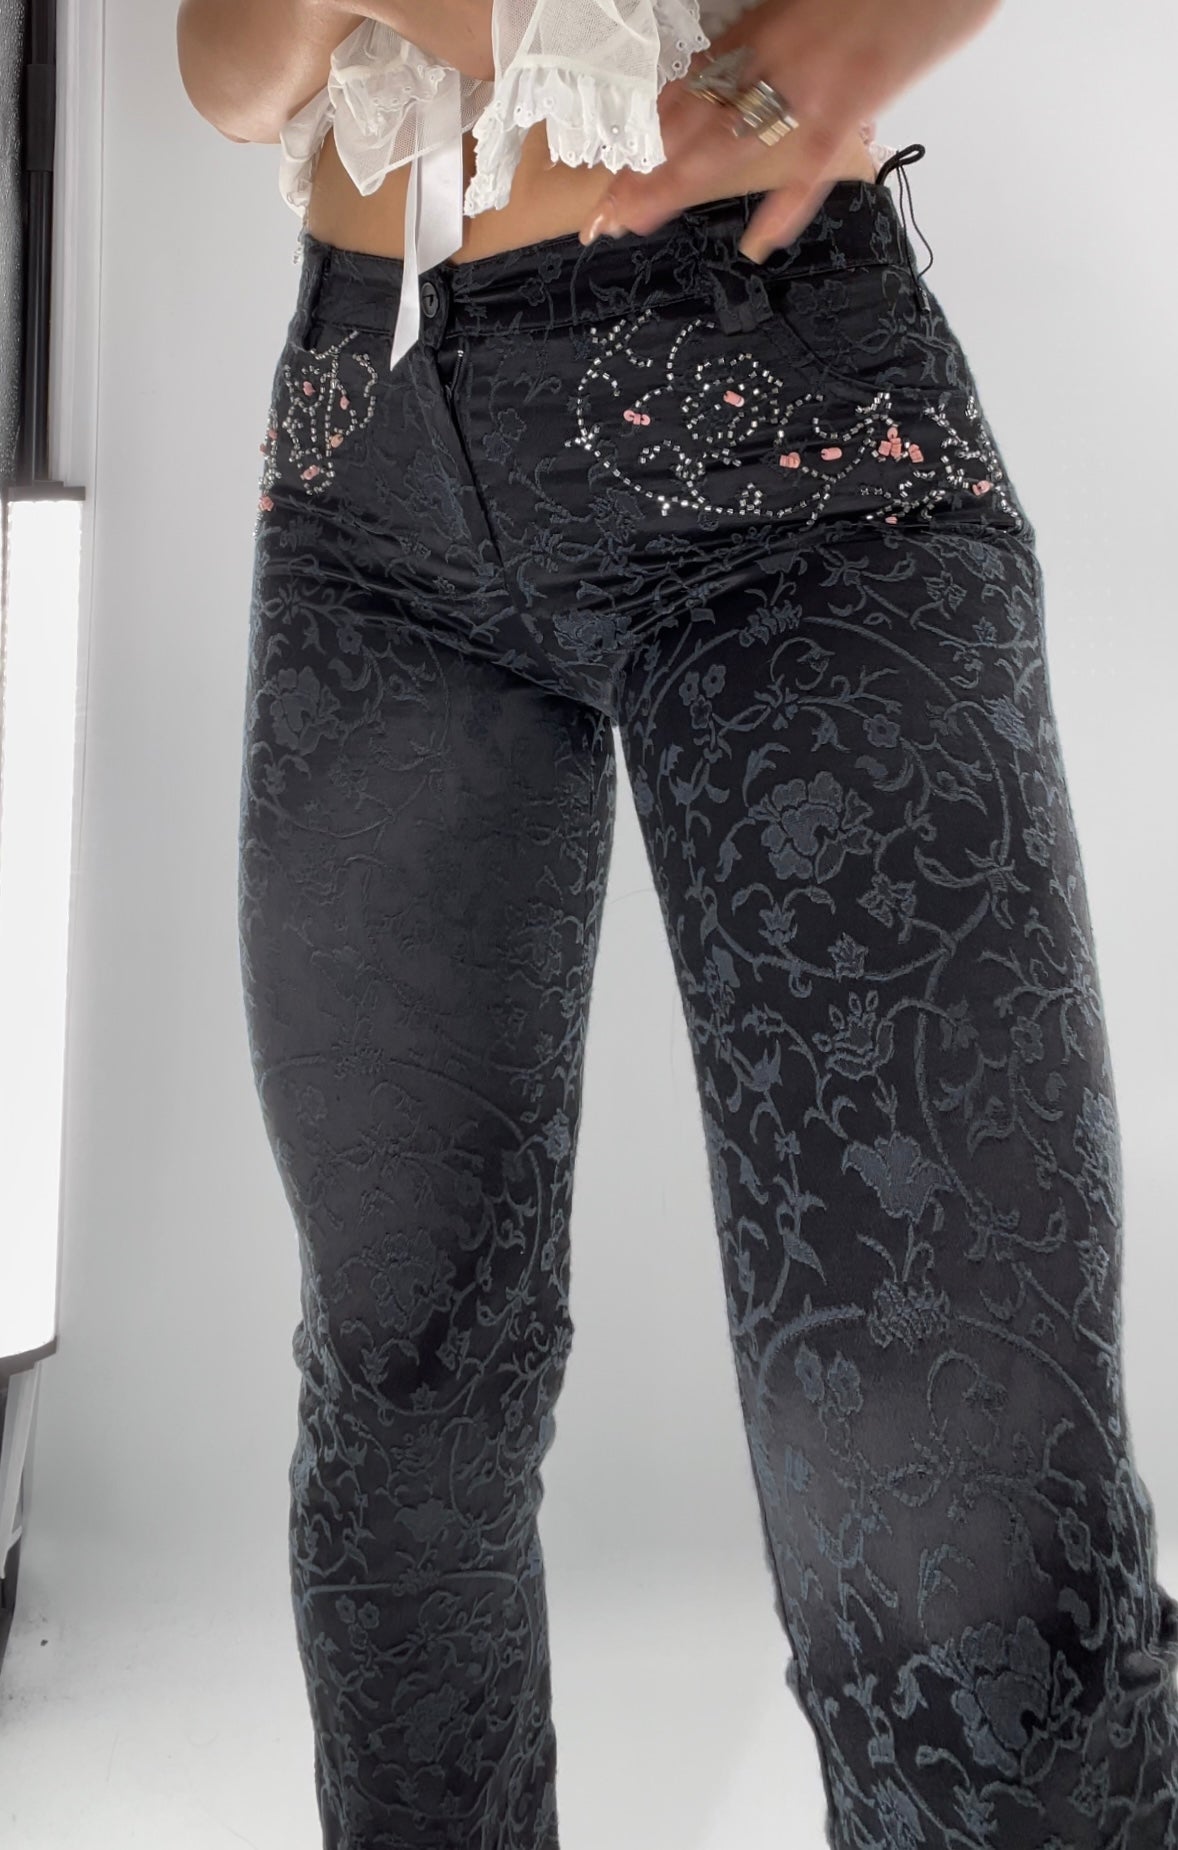 Favori Lace Embossed Satin Pants with Embellishments (36)